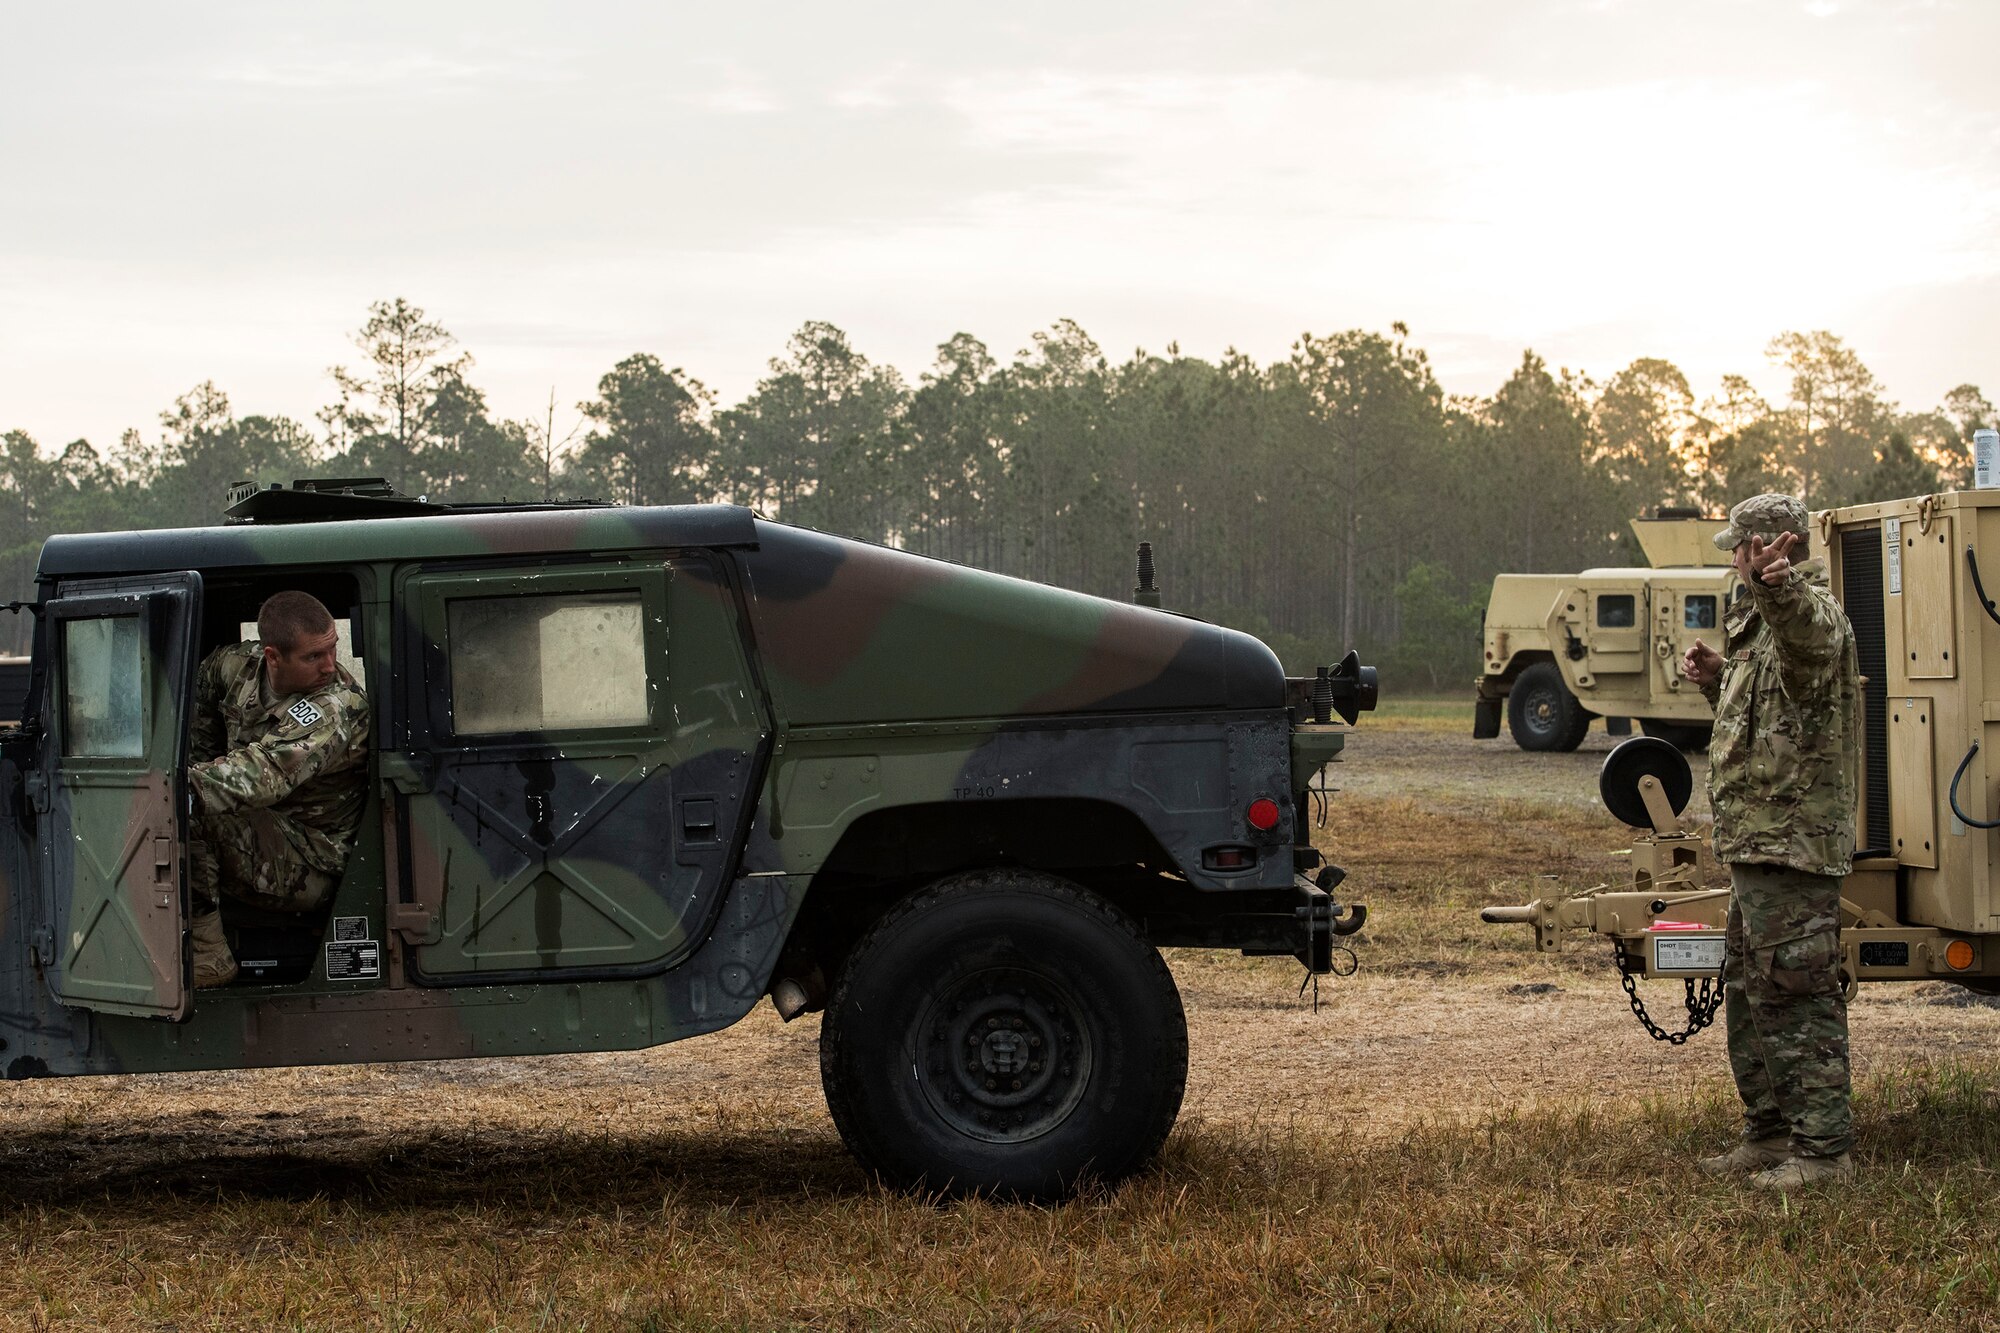 Staff Sgt. Joel Kirtley, 822d Base Defense Squadron NCO in charge of vehicular equipment, backs up a Humvee before connecting it to a generator for transport after a Mission Readiness Exercise, March 13, 2017, at Avon Park Air Force Range, Fla. Throughout the exercise, various missions and scenarios tested the 822d BDS’s ability to adapt and overcome as a team and working vehicles were critical to those missions. (U.S. Air Force photo by Airman 1st Class Janiqua P. Robinson)